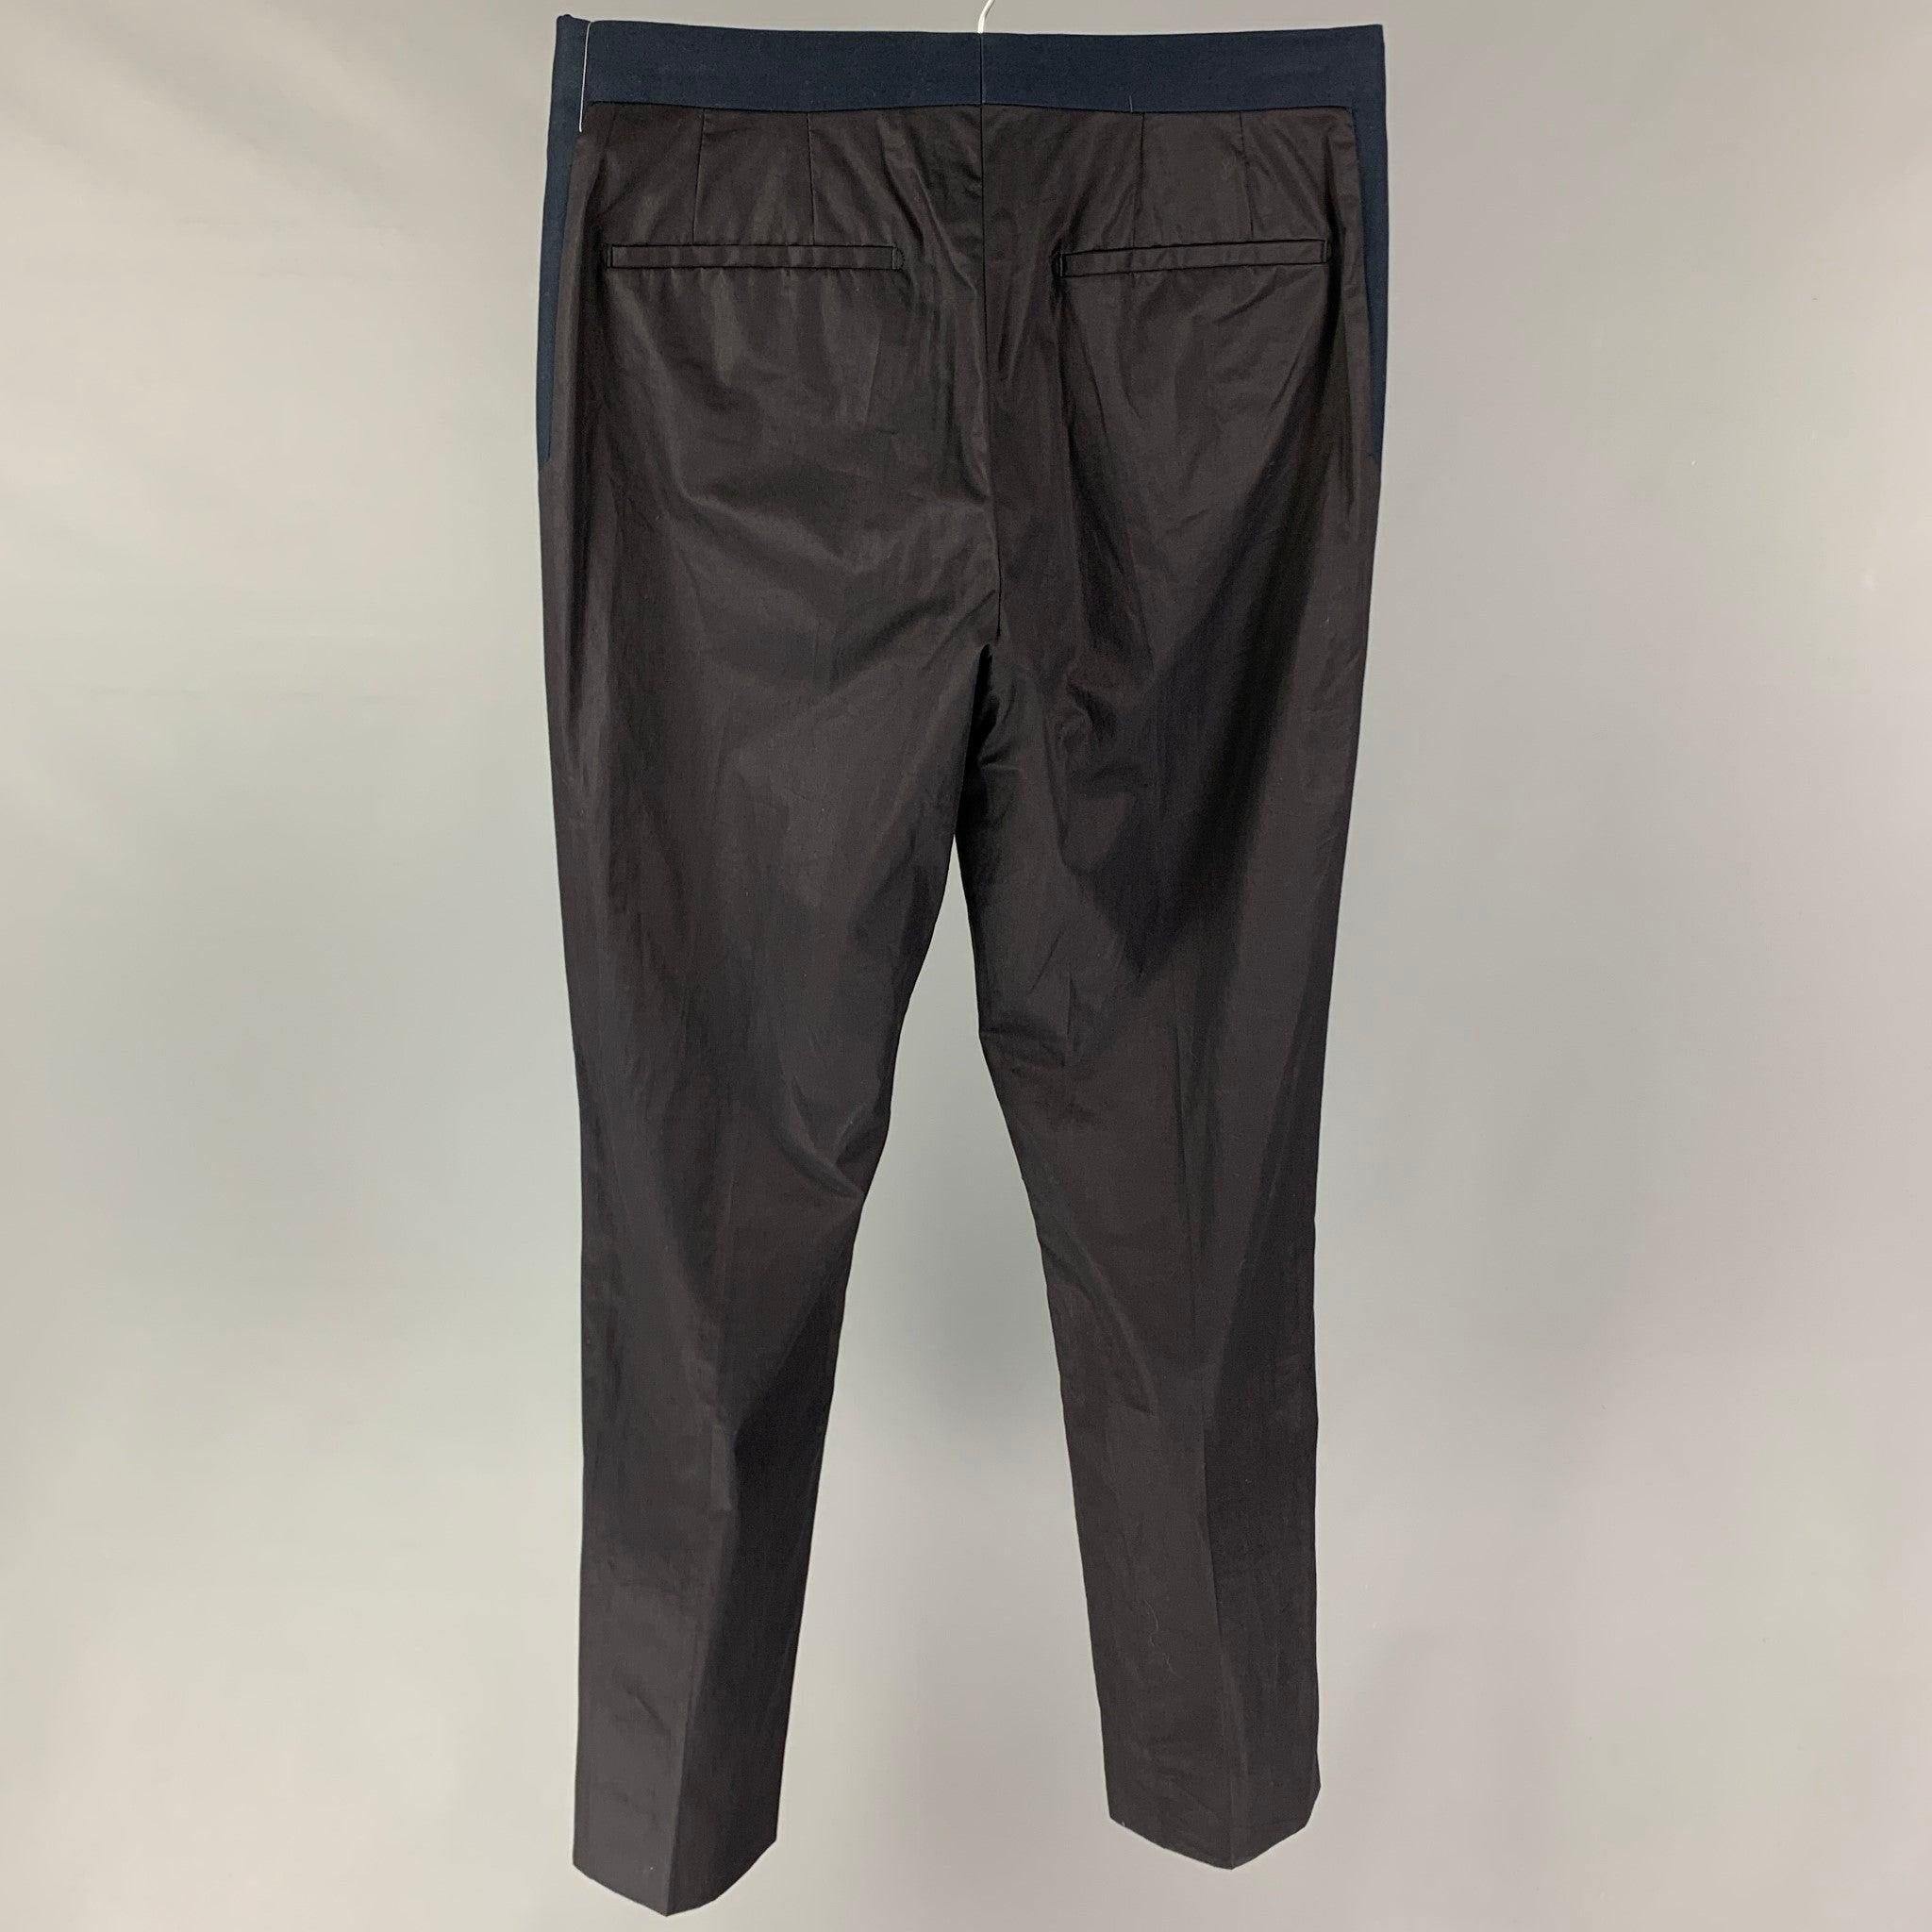 GIVENCHY dress pants comes in a black & navy cotton featuring a slim fit, front tab, and a zip fly closure. Made in Bulgaria.
Very Good
Pre-Owned Condition. 

Marked:   Size tag removed.  

Measurements: 
  Waist: 30 inches  Rise: 10 inches  Inseam: